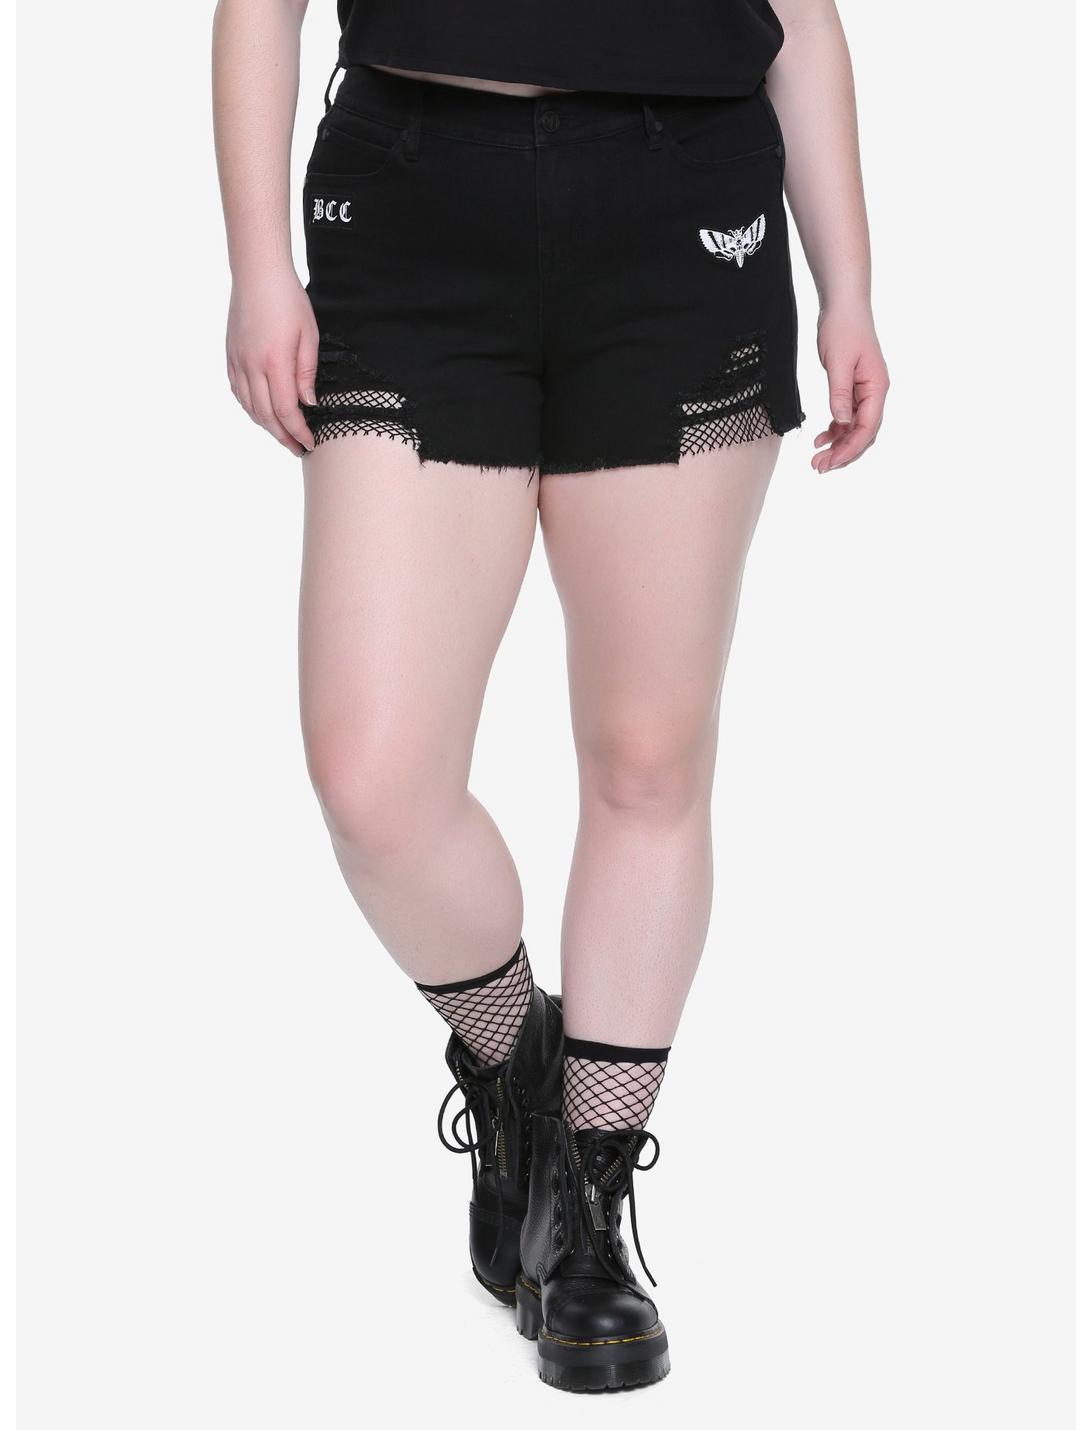 BlackCraft Destroyed Patch Shorts Plus Size Hot Topic Exclusive, BLACK, hi-res